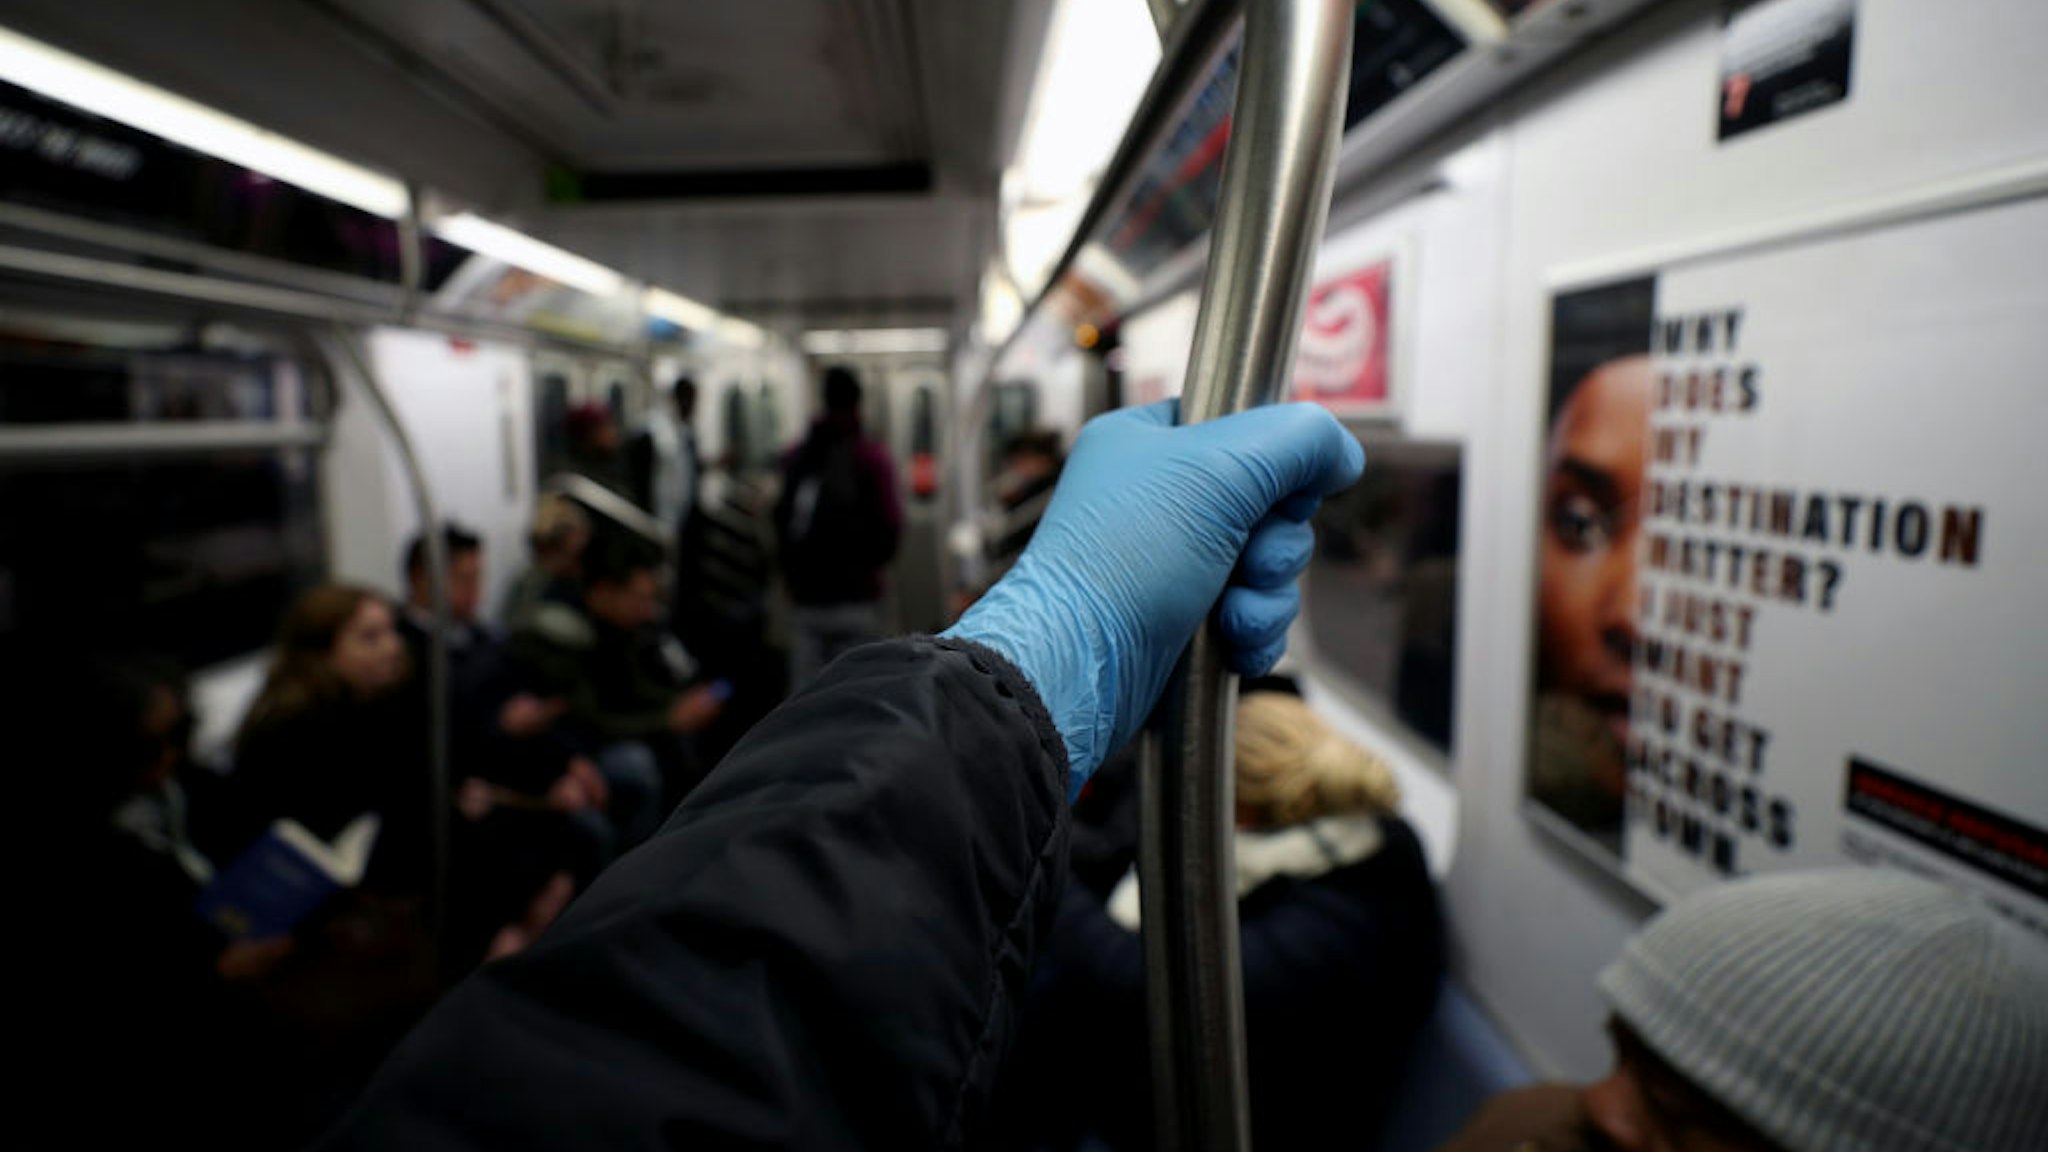 NEW YORK, USA - MARCH 11: A man wears surgical gloves to prevent Covid-19 spread, at the New York City subway train in New York, United States on March 11, 2020. (Photo by Tayfun Coskun/Anadolu Agency via Getty Images)NEW YORK, USA - MARCH 11: A man wears surgical gloves to prevent Covid-19 spread, at the New York City subway train in New York, United States on March 11, 2020. (Photo by Tayfun Coskun/Anadolu Agency via Getty Images)